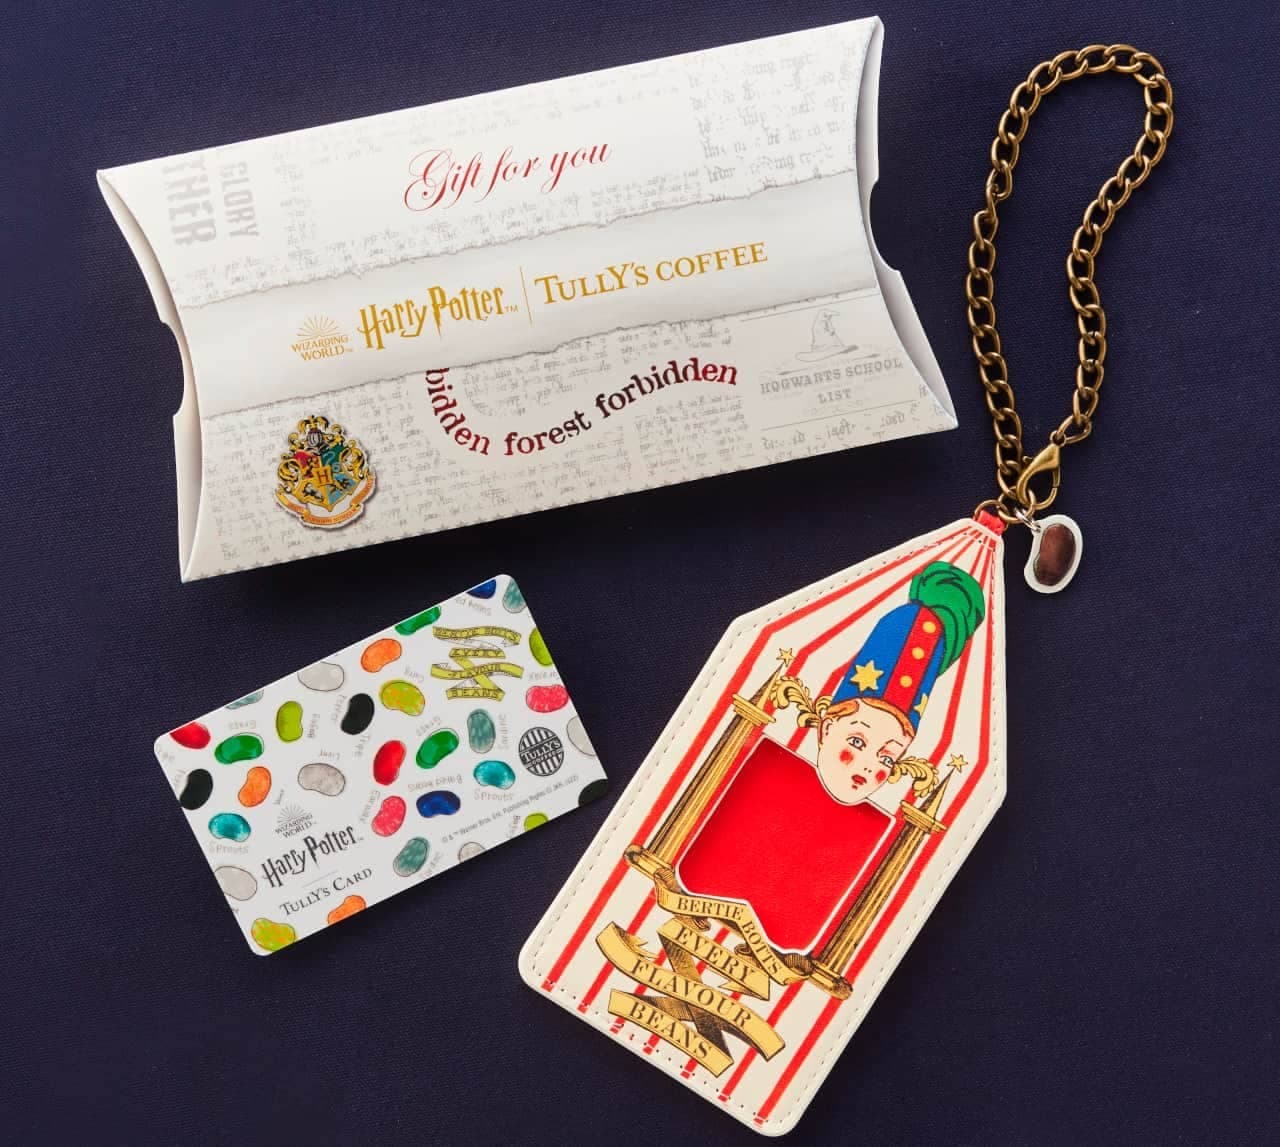 Tully's Coffee "Bertie Bott's Hundred Flavor Beans Tully's Card & Card Case with Exclusive Gift Case".